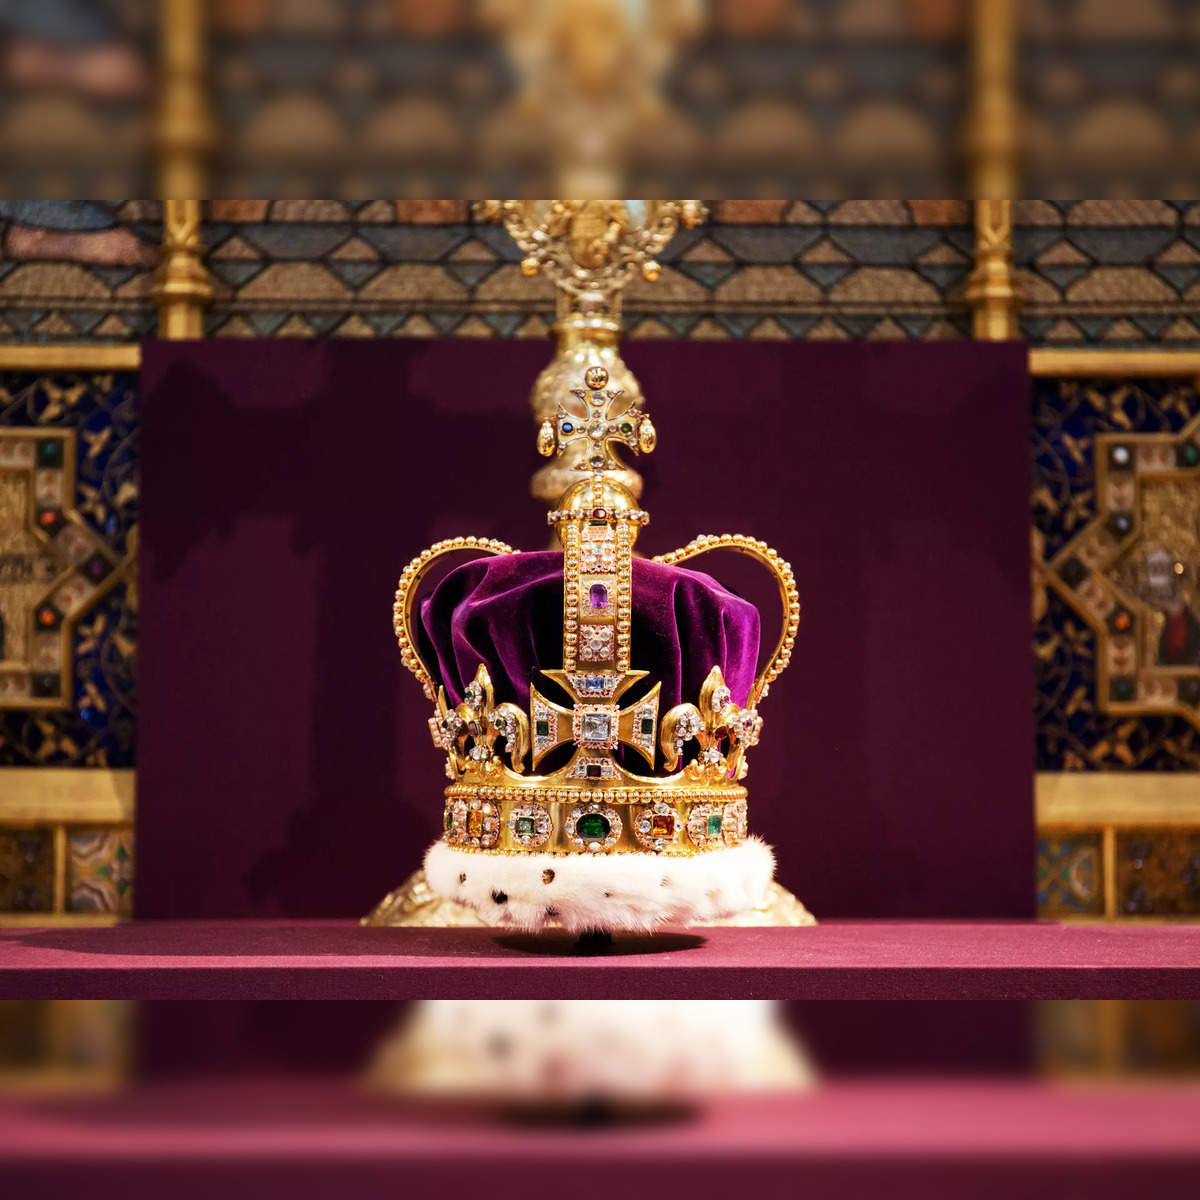 Kohinoor To Be Cast As Symbol Of Conquest In New Tower of London Display